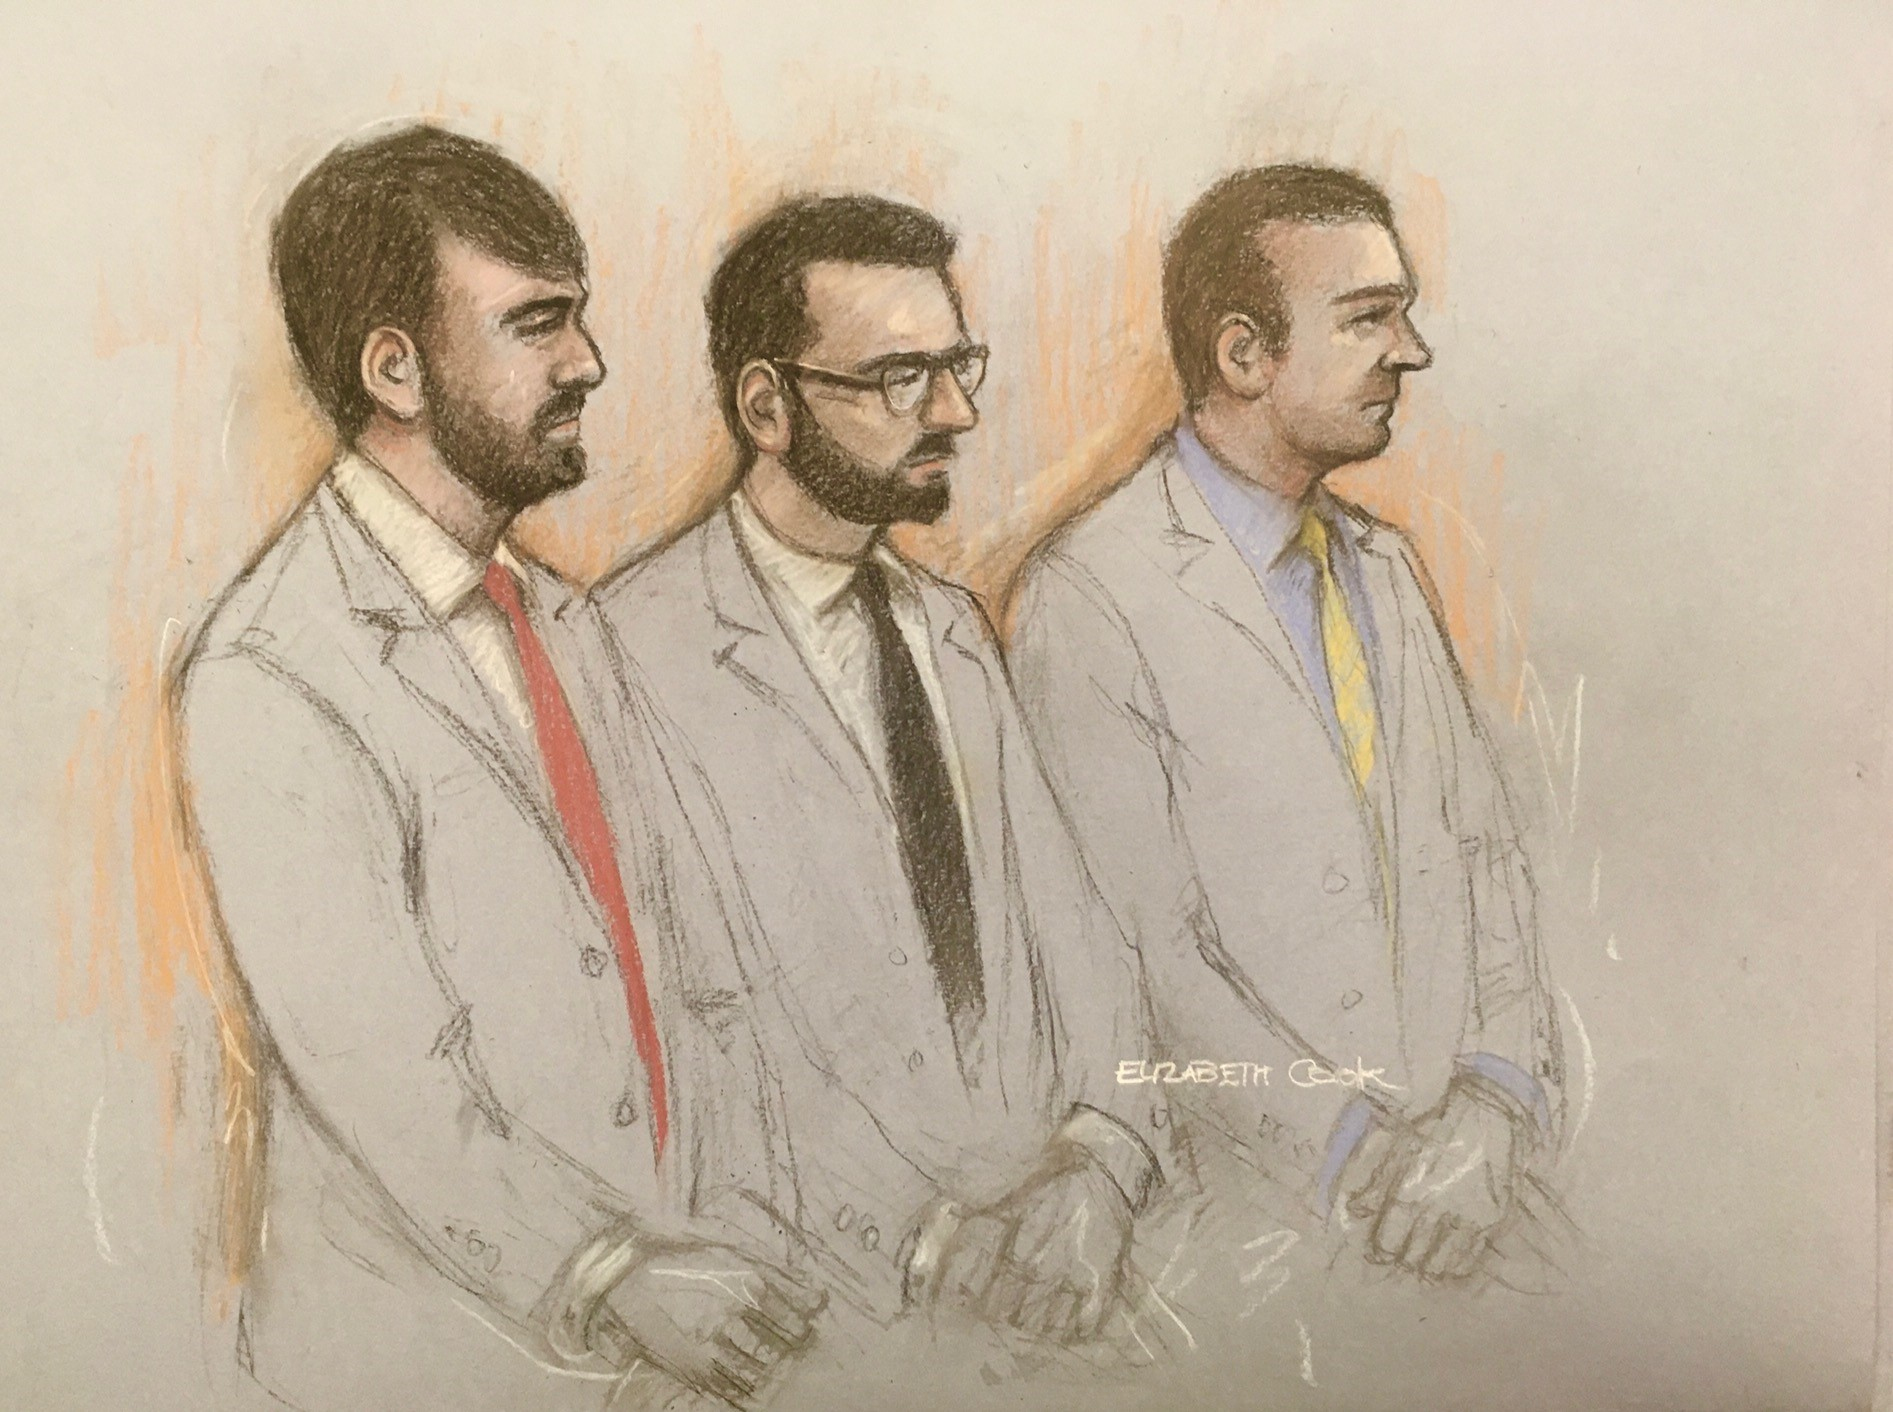 Court artist sketch by Elizabeth Cook of (left to right) serving Metropolitan police officers Pc William Neville, and Jonathon Cobban, along with former police officer Joel Borders appearing in the dock at Westminster Magistrates Court, in London,